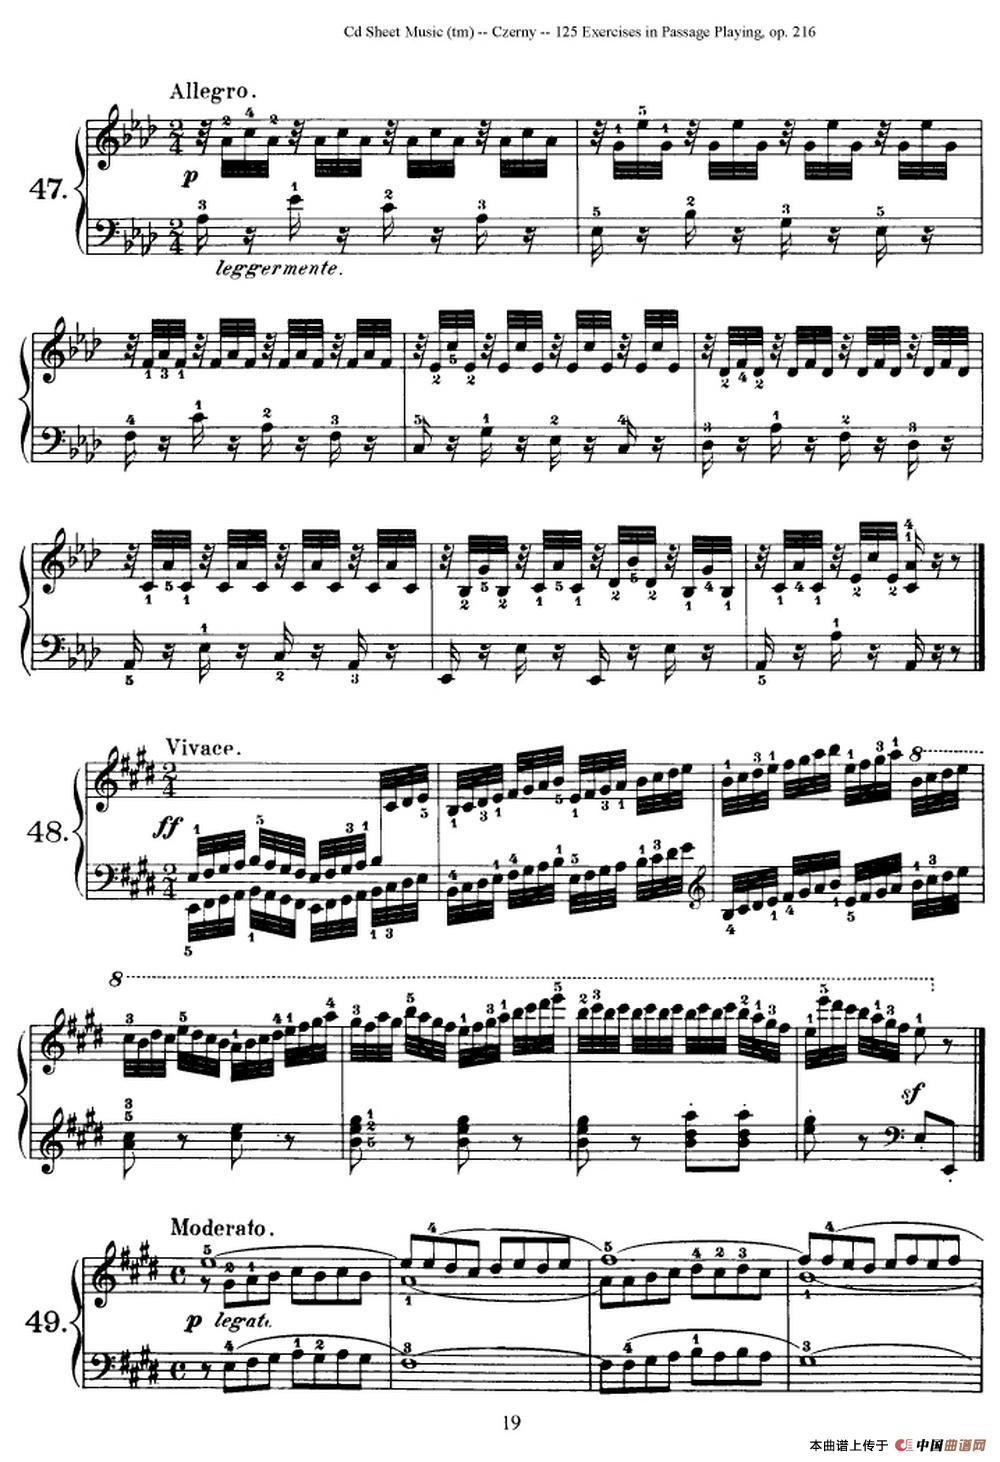 125 Exercises in Passage Playing Op.261（车尔尼125首钢琴